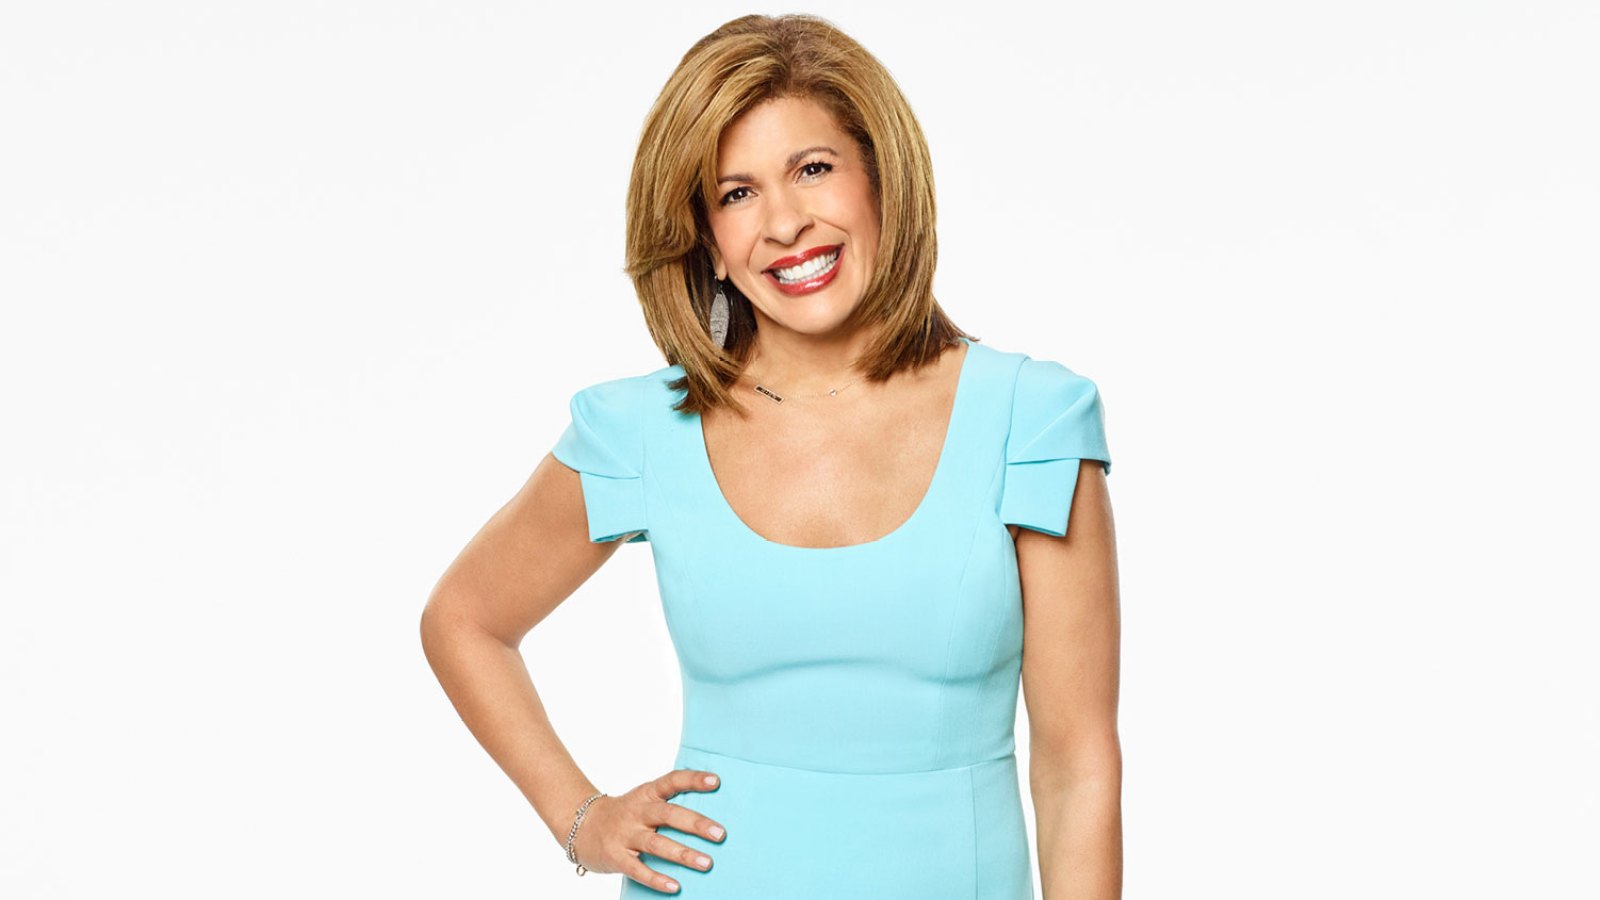 Hoda Kotb Gives Update on Daughter Hope After Her Health Scare and Hospitalization